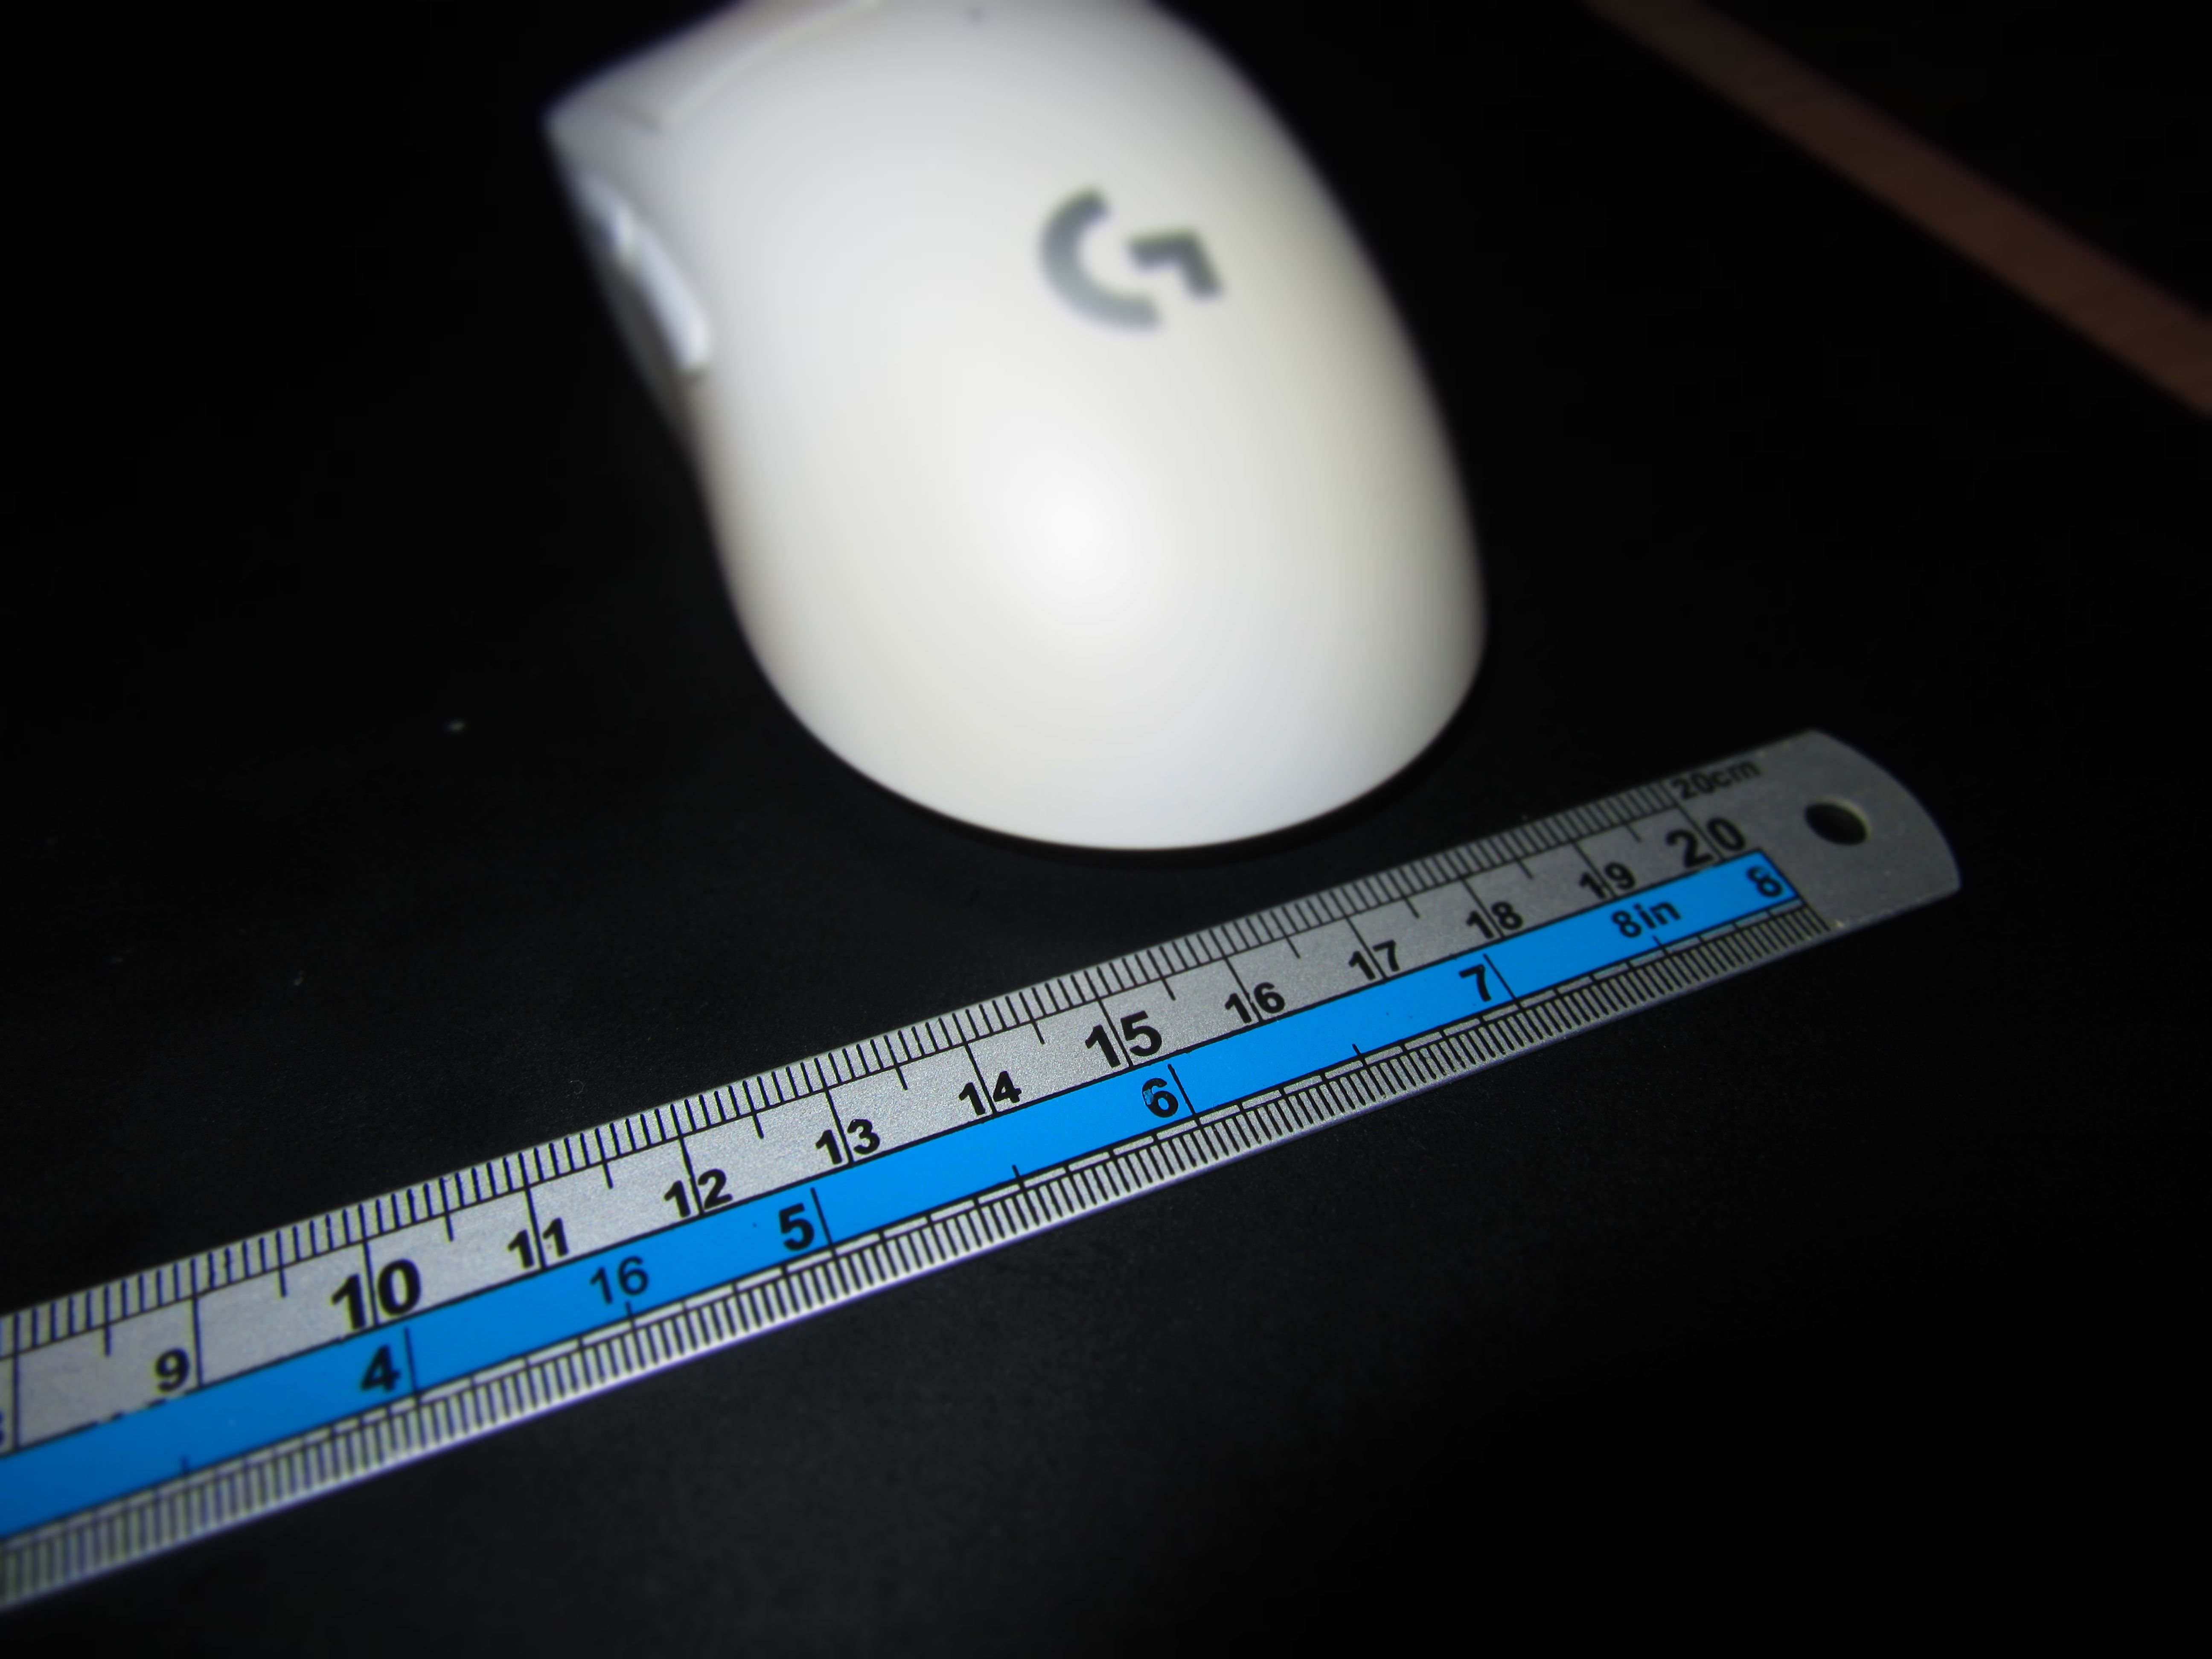 Mouse with ruler behind it